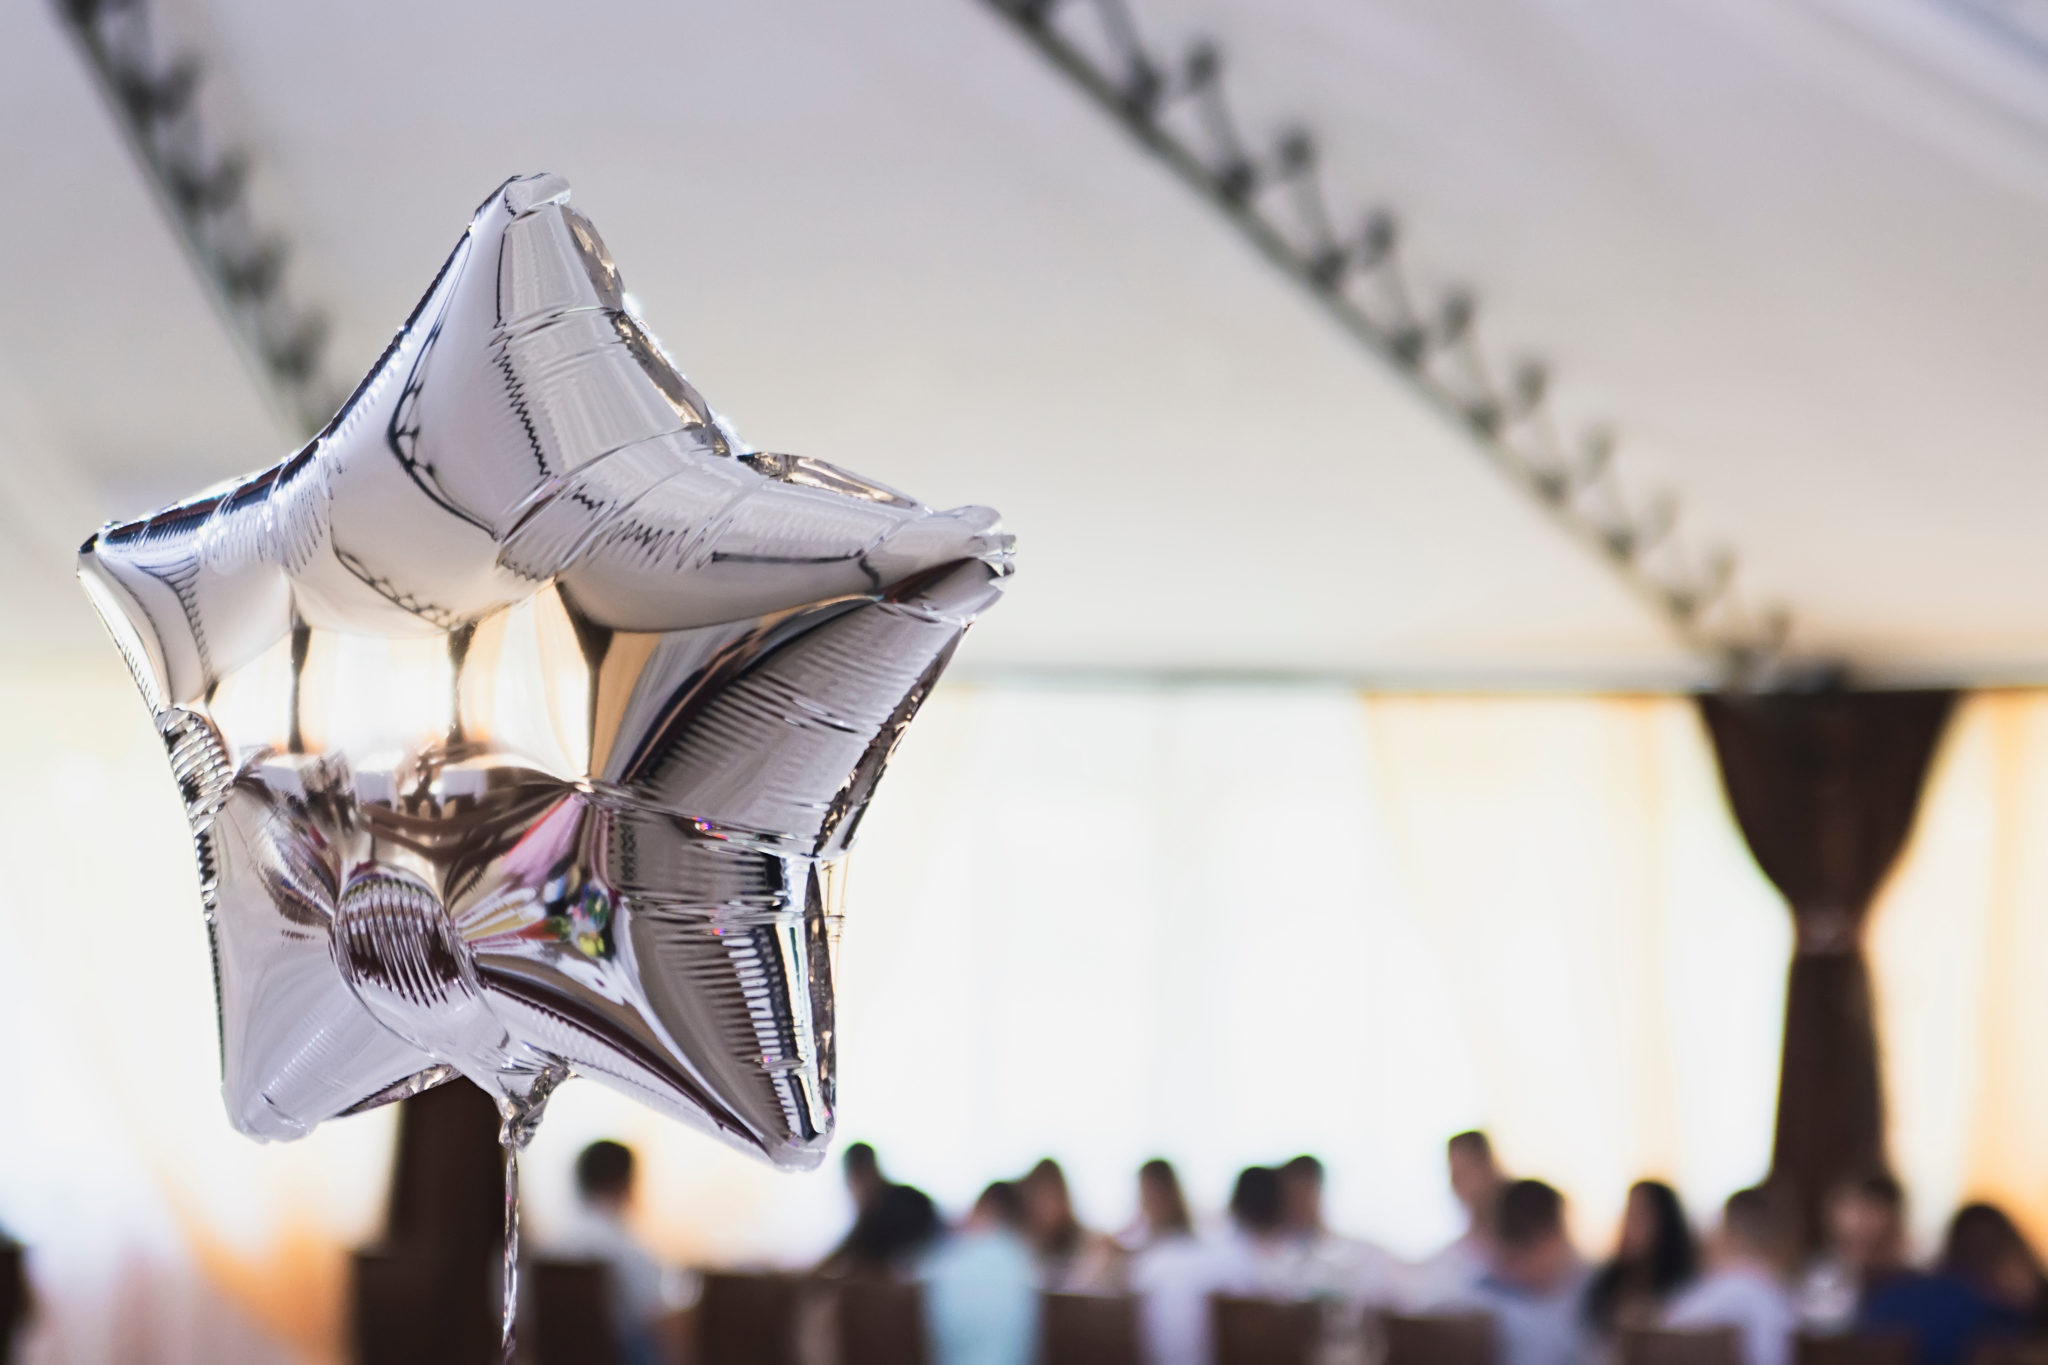 Mylar balloons are shinier than latex balloons because they are made of two different materials. The base material is mylar, which is a type of nylon, while the outer, thin layer is foil, which is aluminum. (Photo: Adobe Stock licensed to The Zebra Press)